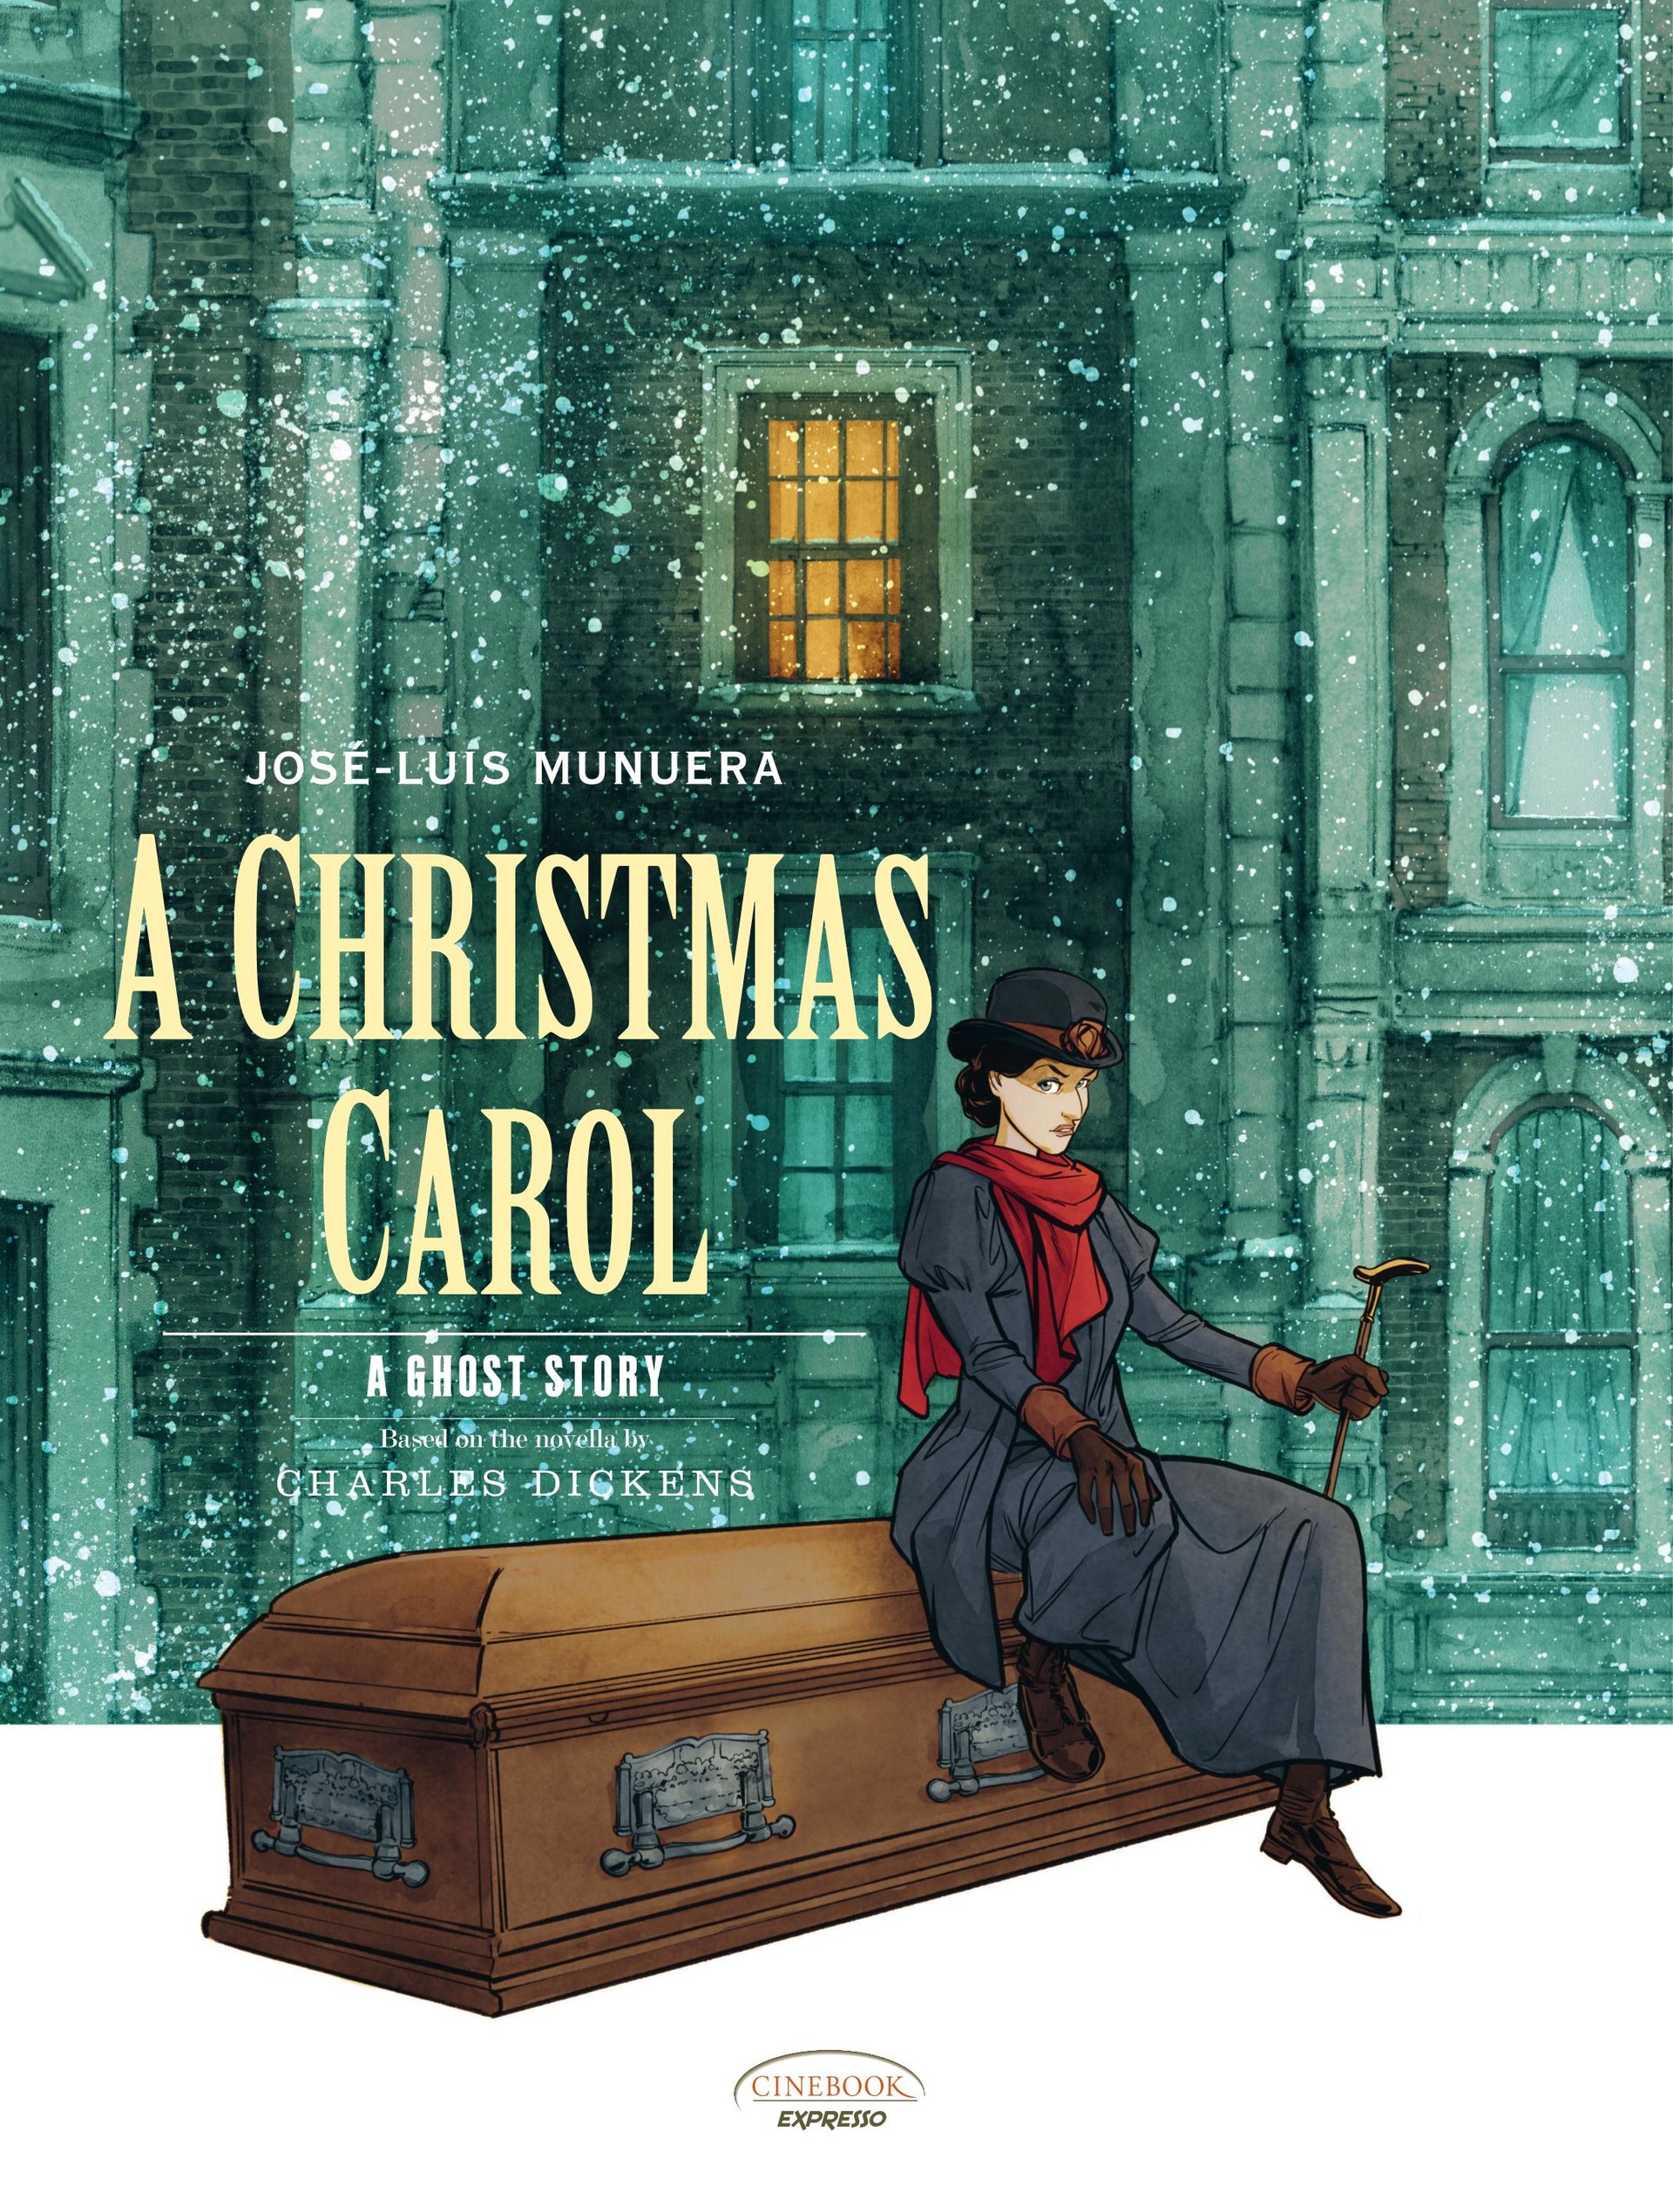 Read online A Christmas Carol: A Ghost Story comic -  Issue # Full - 1